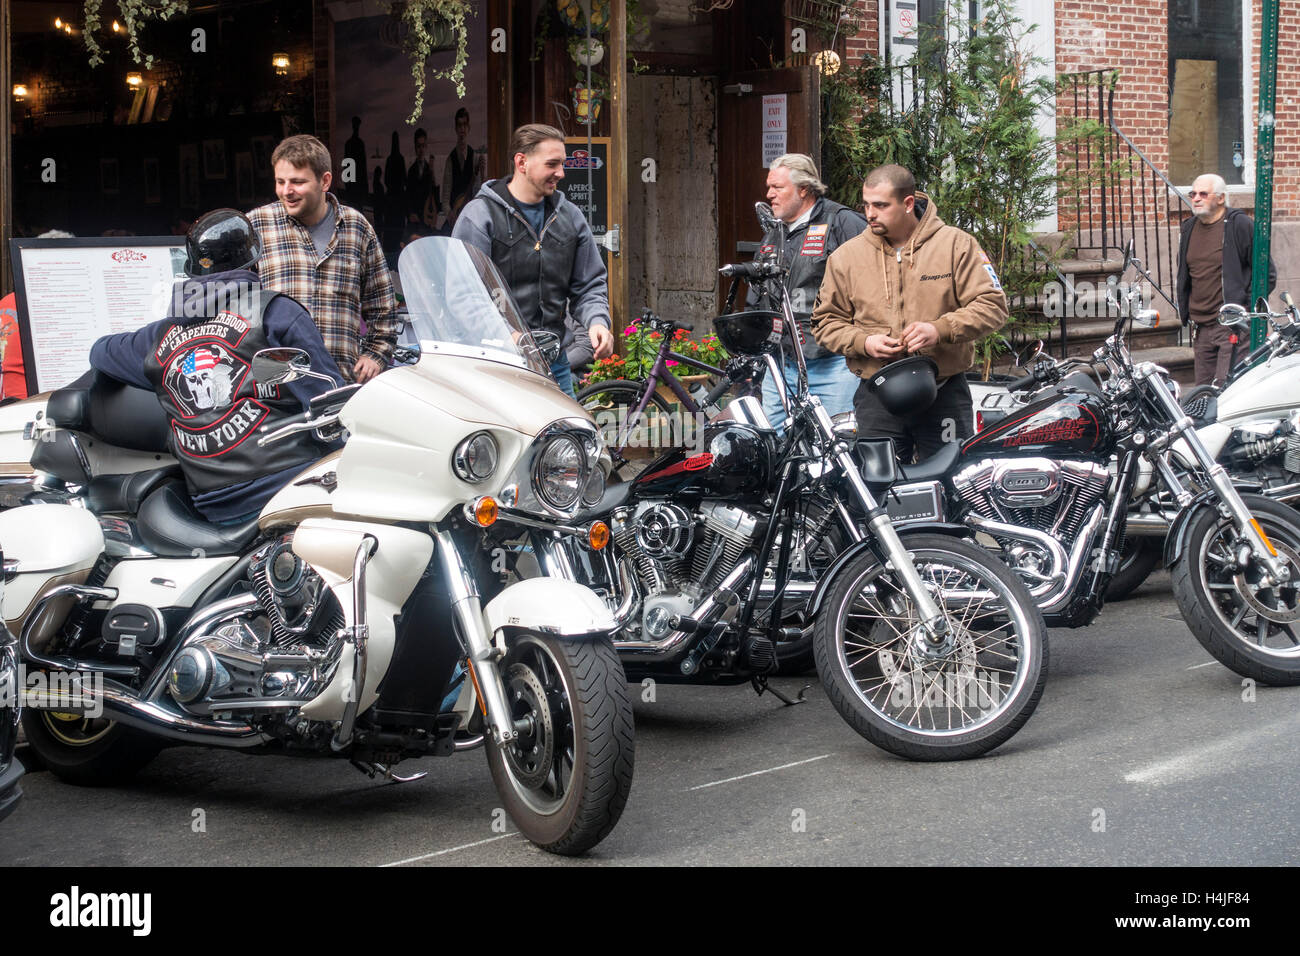 A Harley-Davidson motorcycle club parking their bikes outside a Little Italy restaurant in New York City Stock Photo